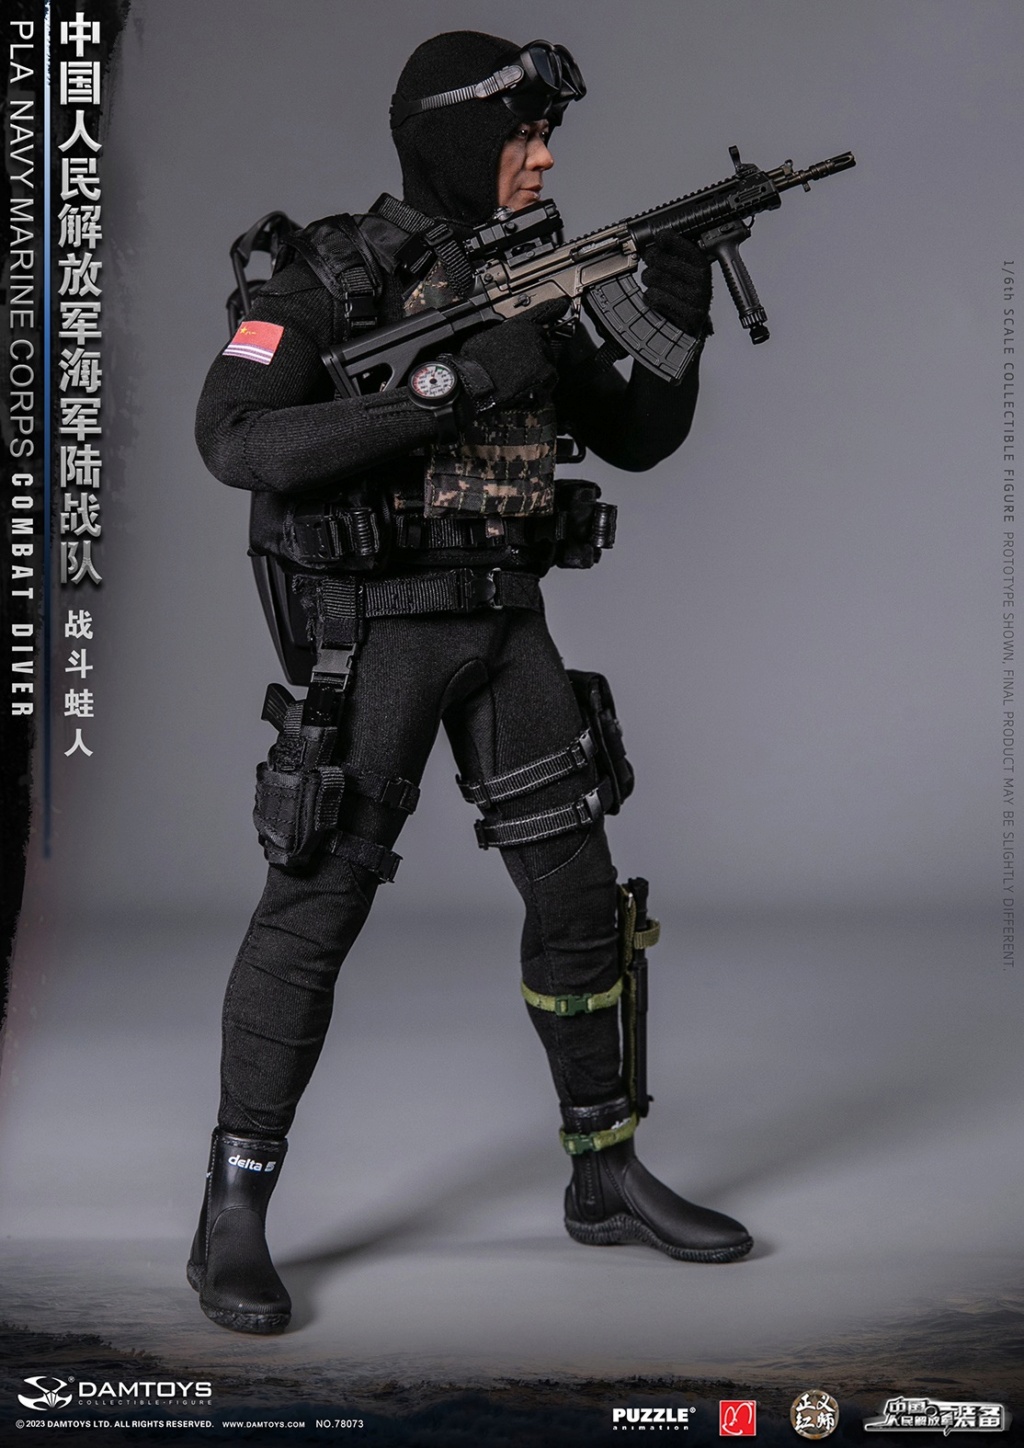 male - NEW PRODUCT: DAMToys: 1/6 Chinese People's Liberation Army Marine Corps - Combat Frogman Action Figure #78073 14302512